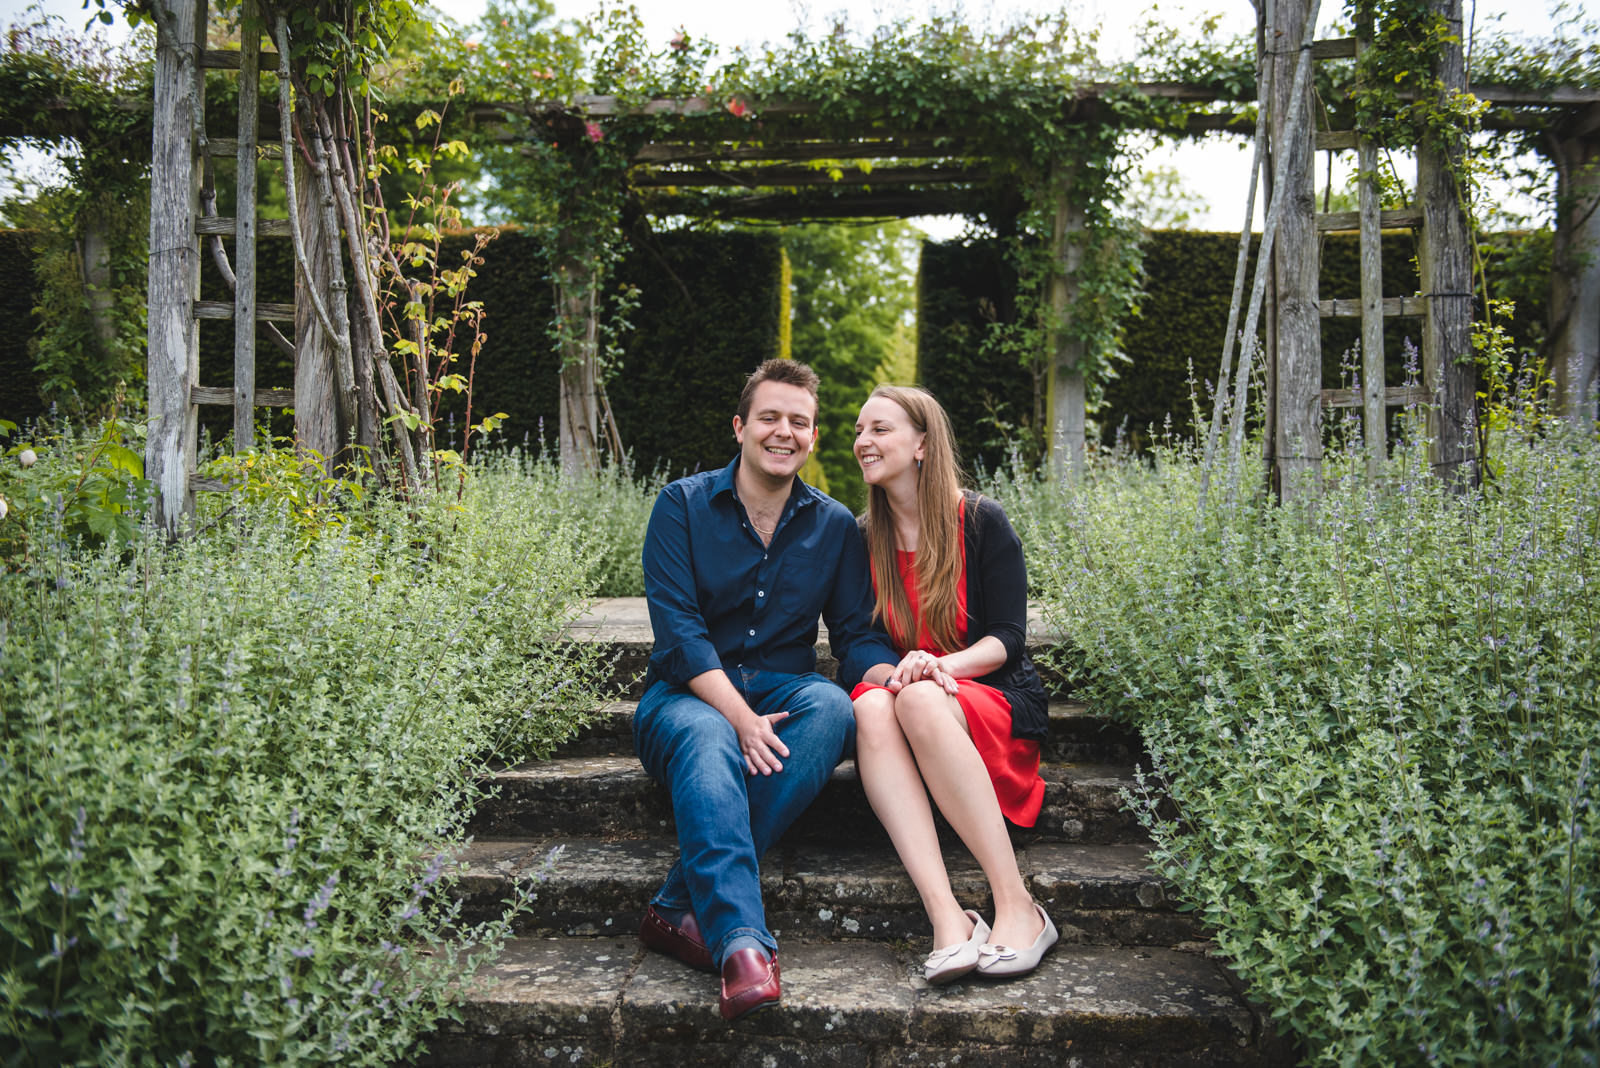 Early Summer engagement photos in the gardens at Great Fosters.